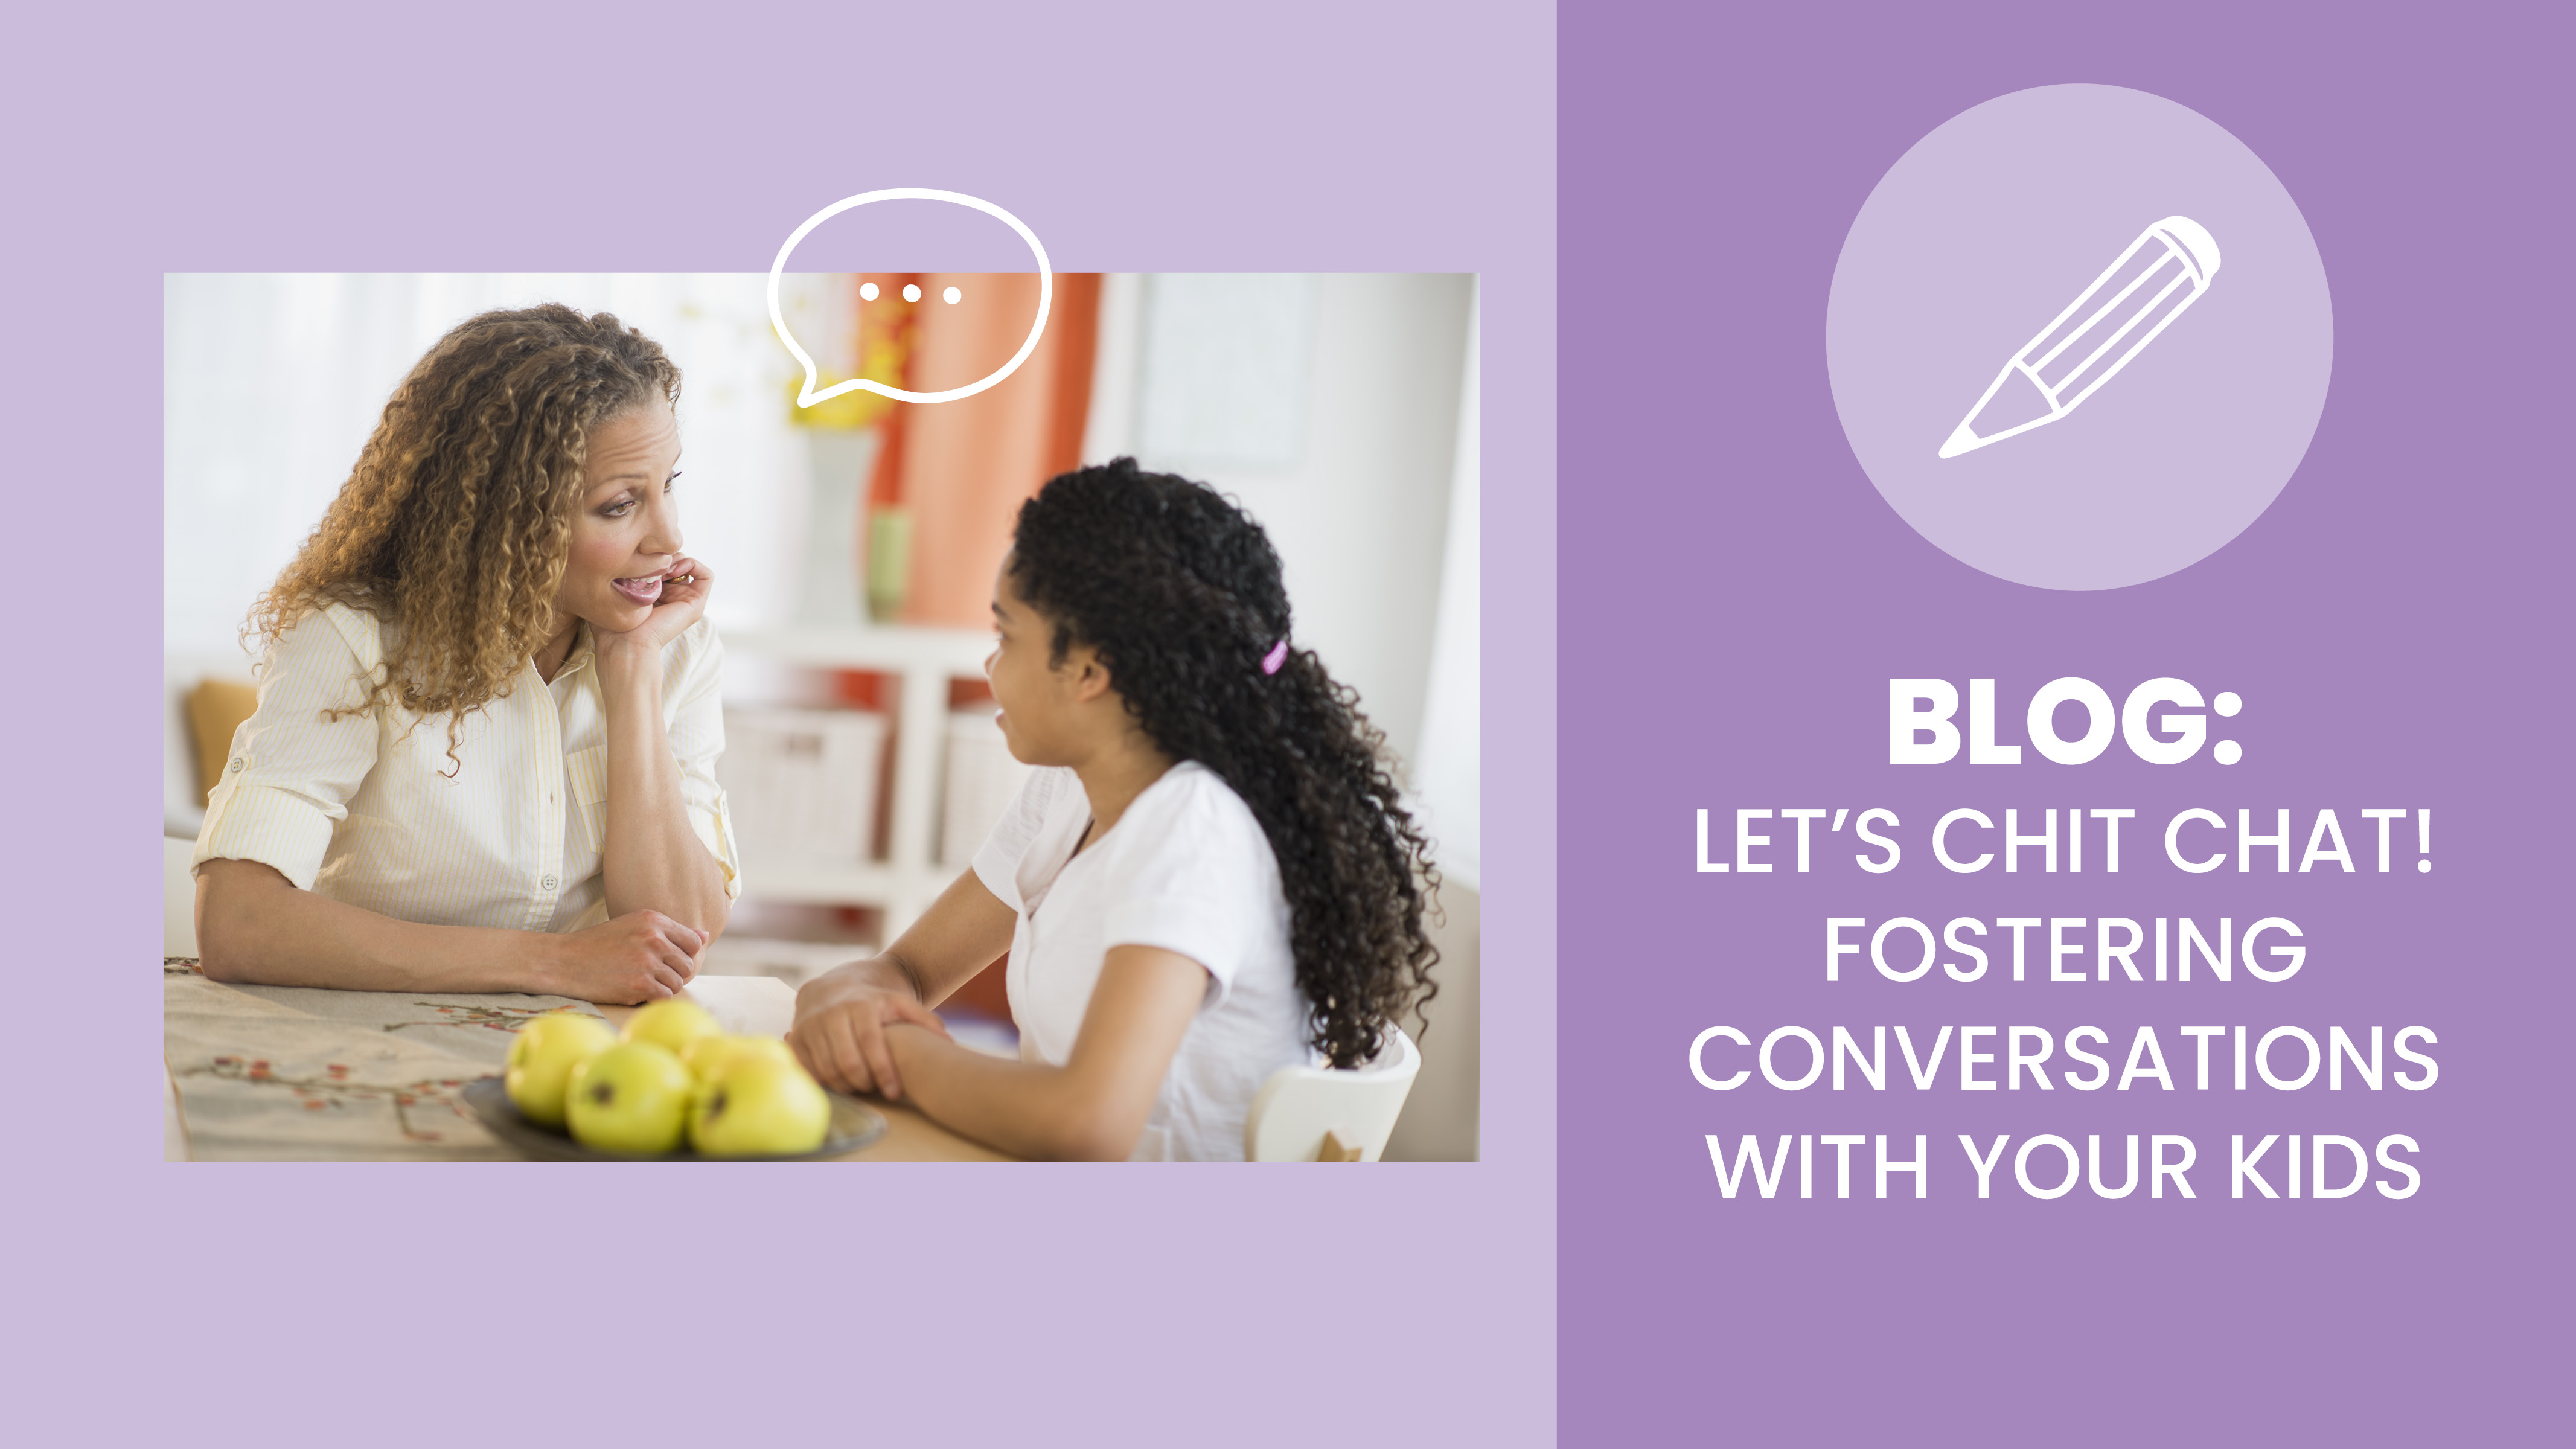 https://fit.sanfordhealth.org/-/media/fit/images/blog/lets-chit-chat-fostering-conversations-with-your-kids.jpg?h=2400&iar=0&w=4267&hash=87C0A6B2A8ADA60D8E9E03323DC33560